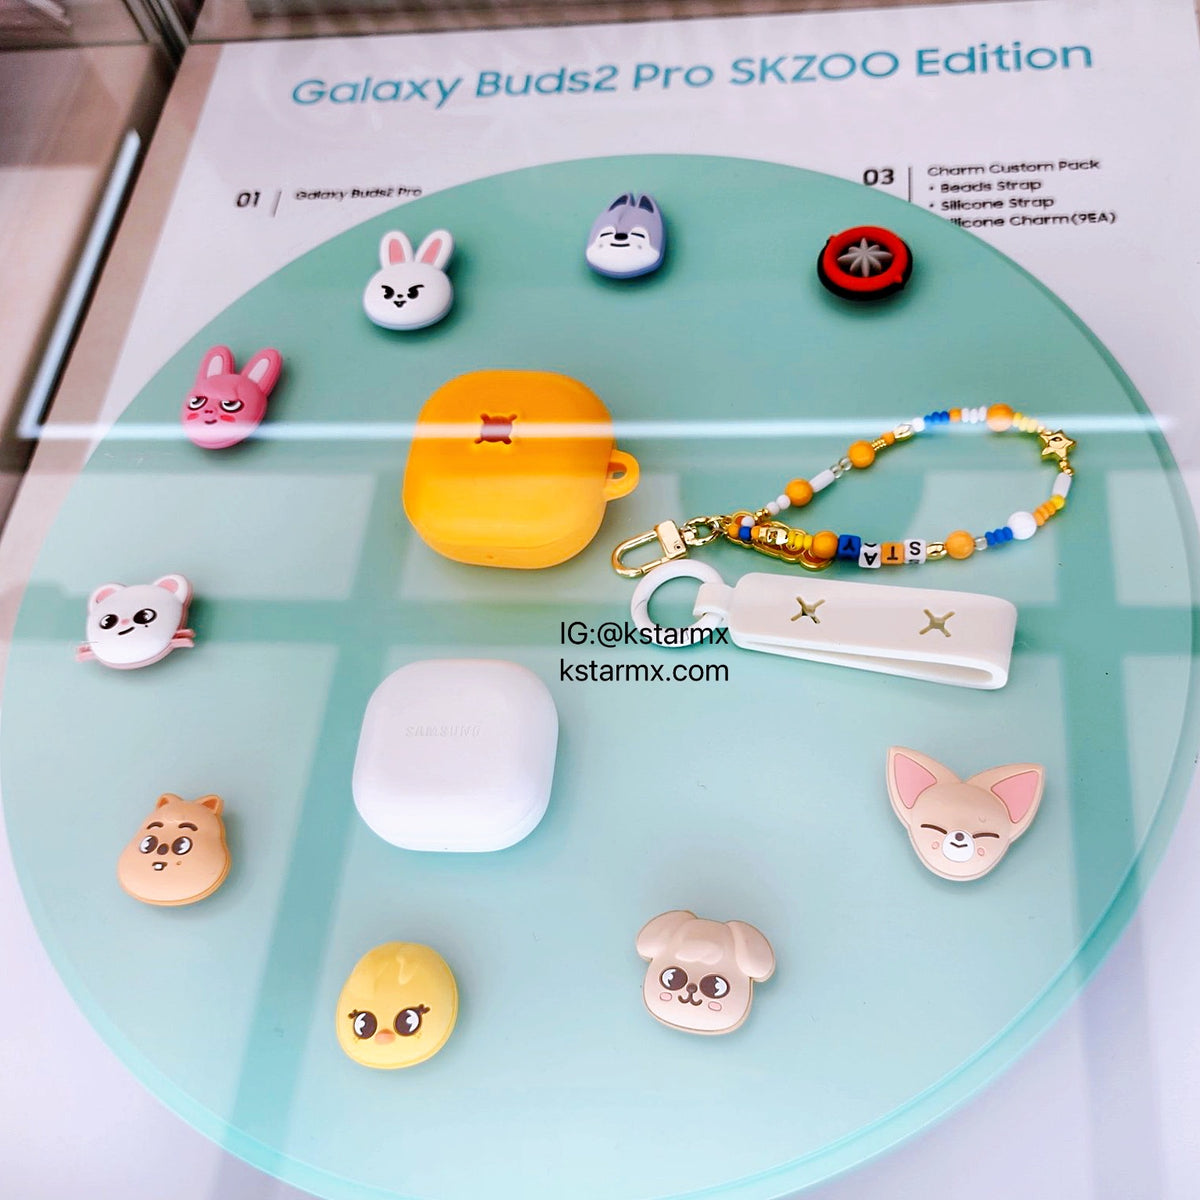 STRAY KIDS x SLBS Official Galaxy Buds2 Pro SKZOO Edition – K 